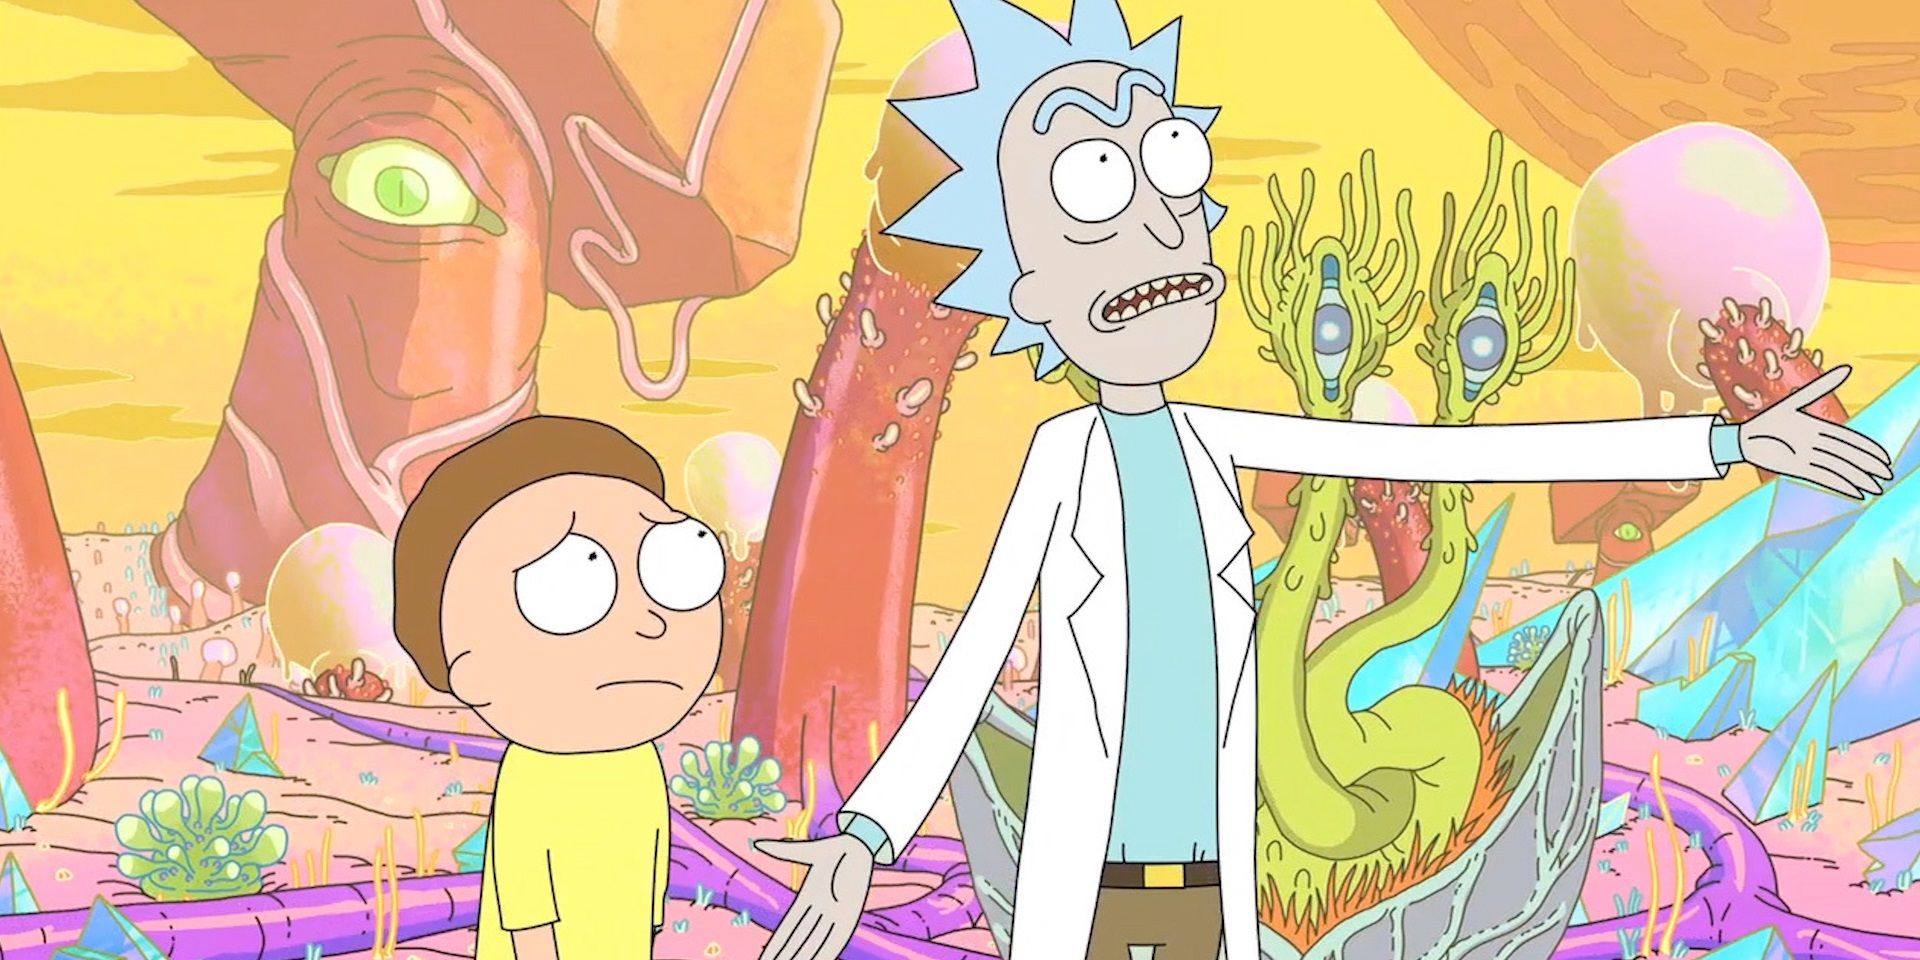 Rick and Morty on an alien planet